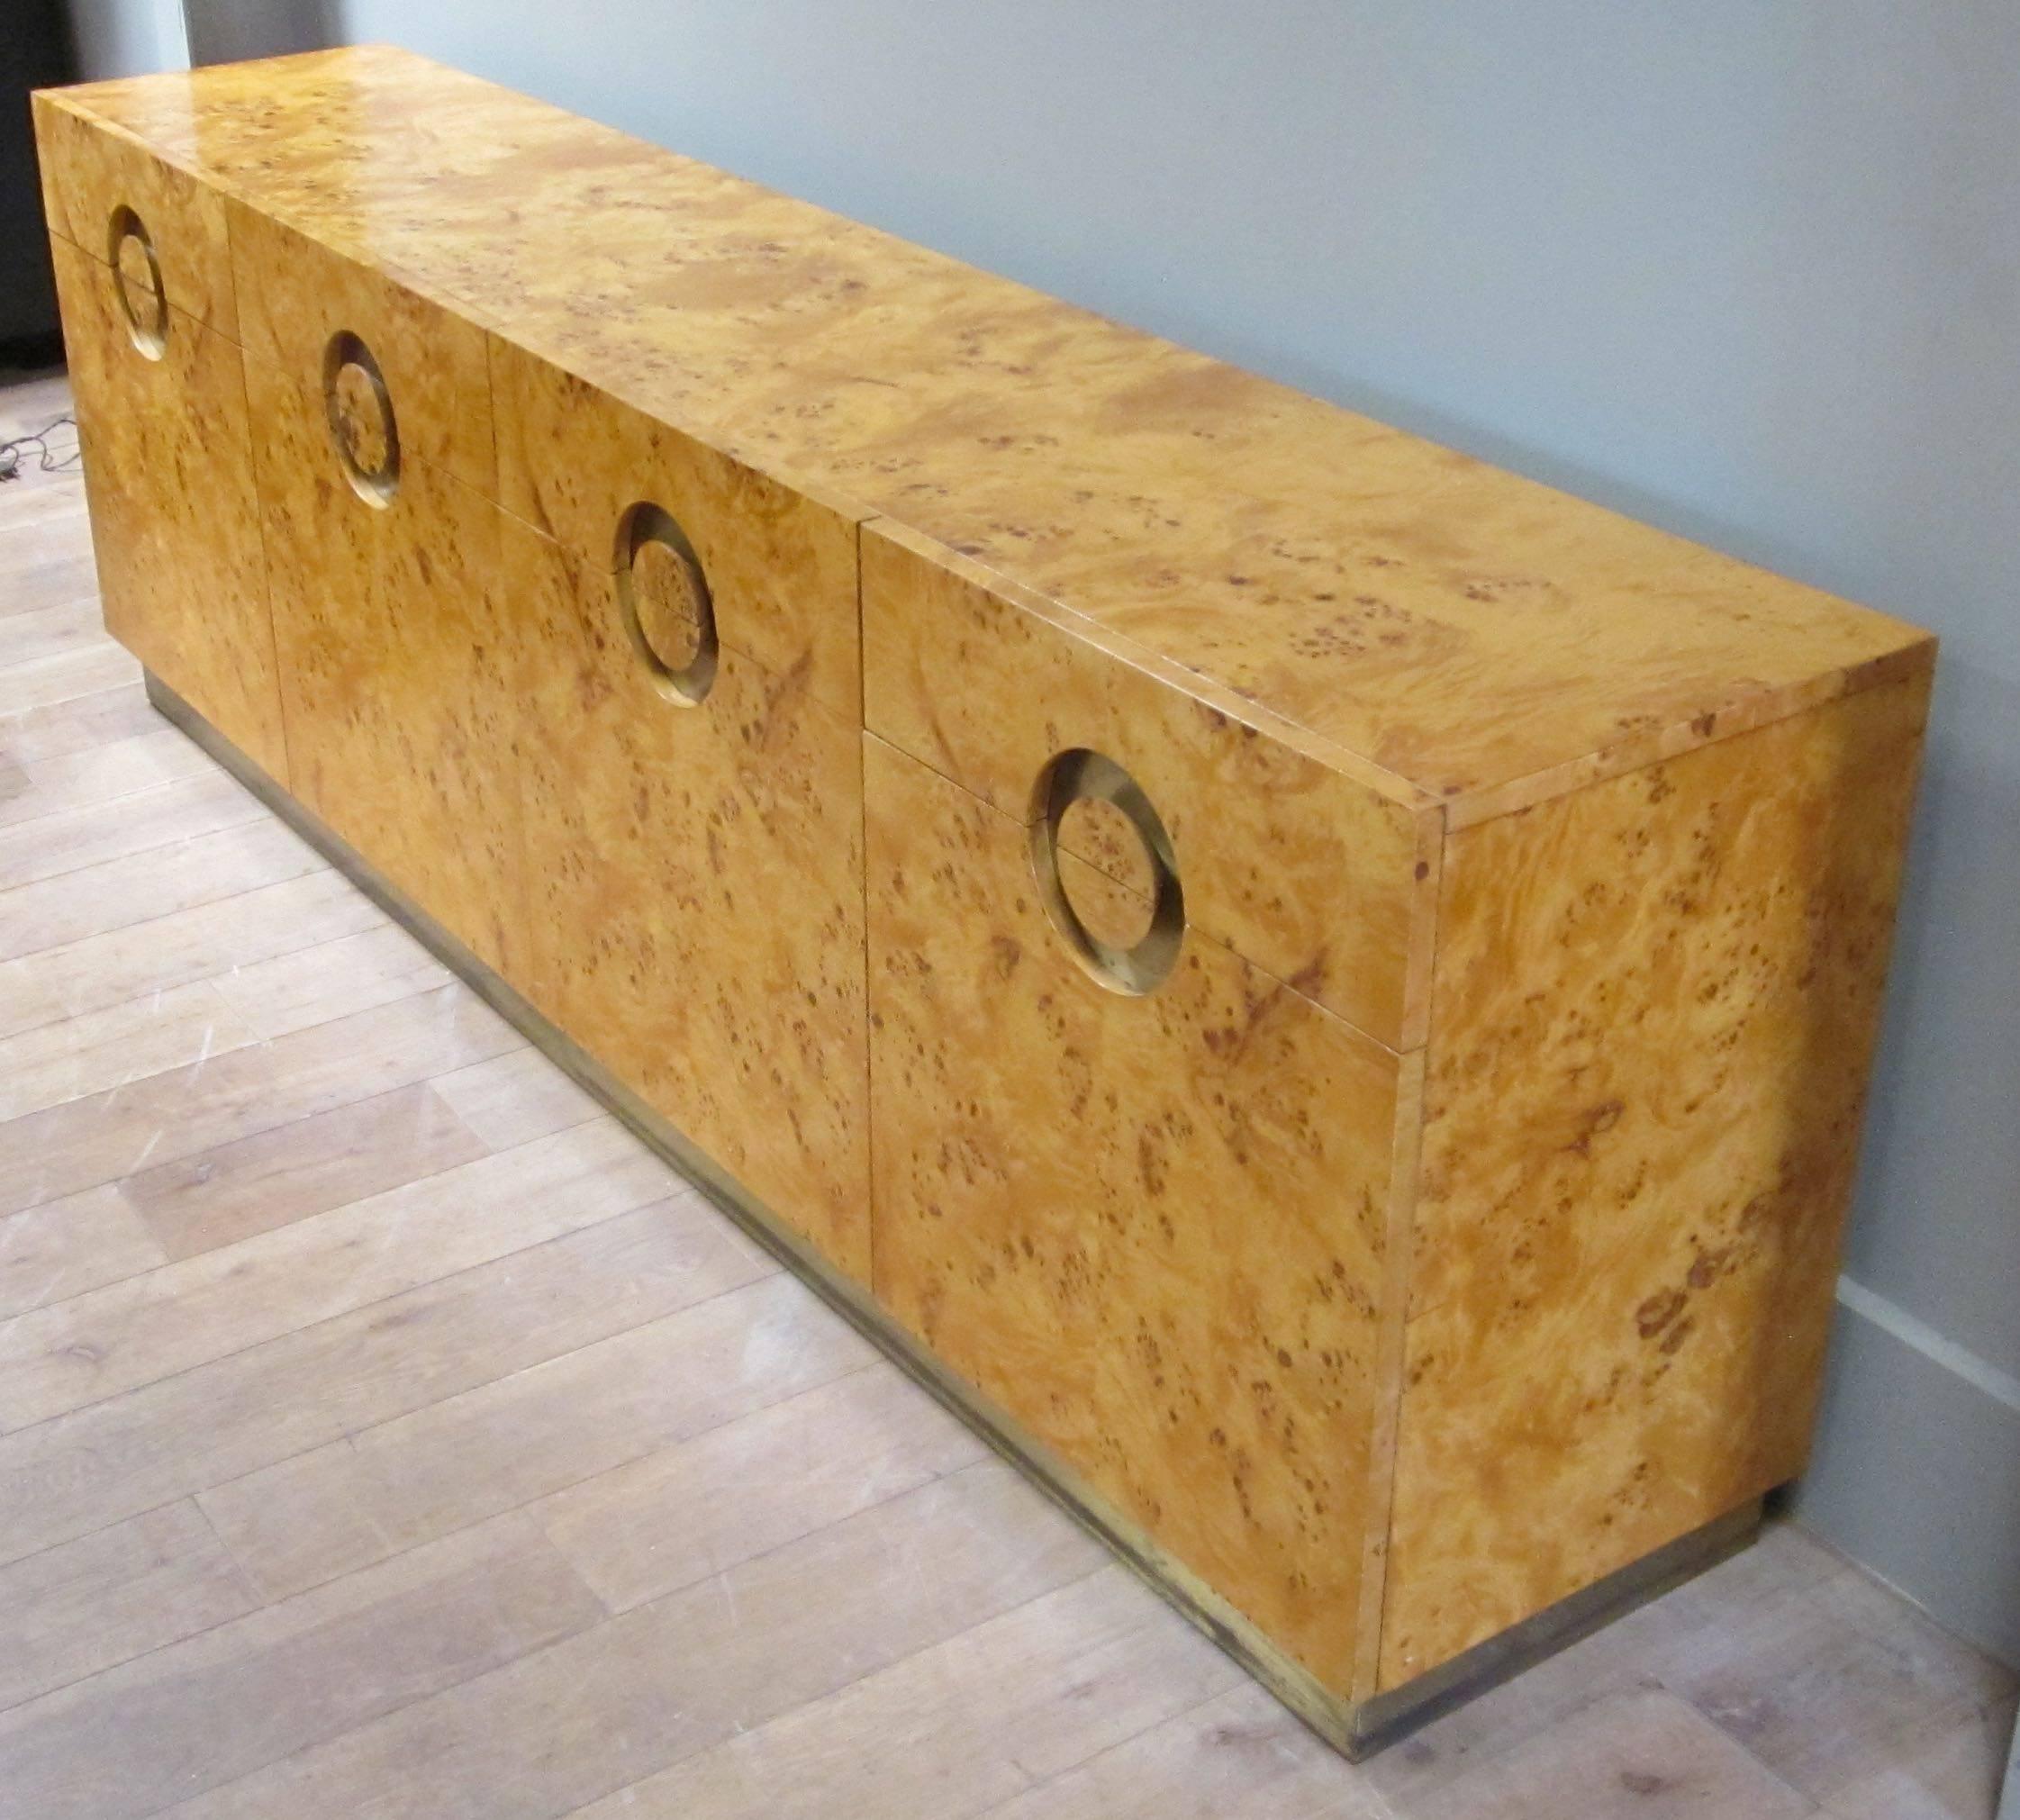 1970s burl birchwood credenza by Italian designer Willy Rizzo.
There are four doors. Four drawers. Brass trim. Brass base. Eight interior shelves.